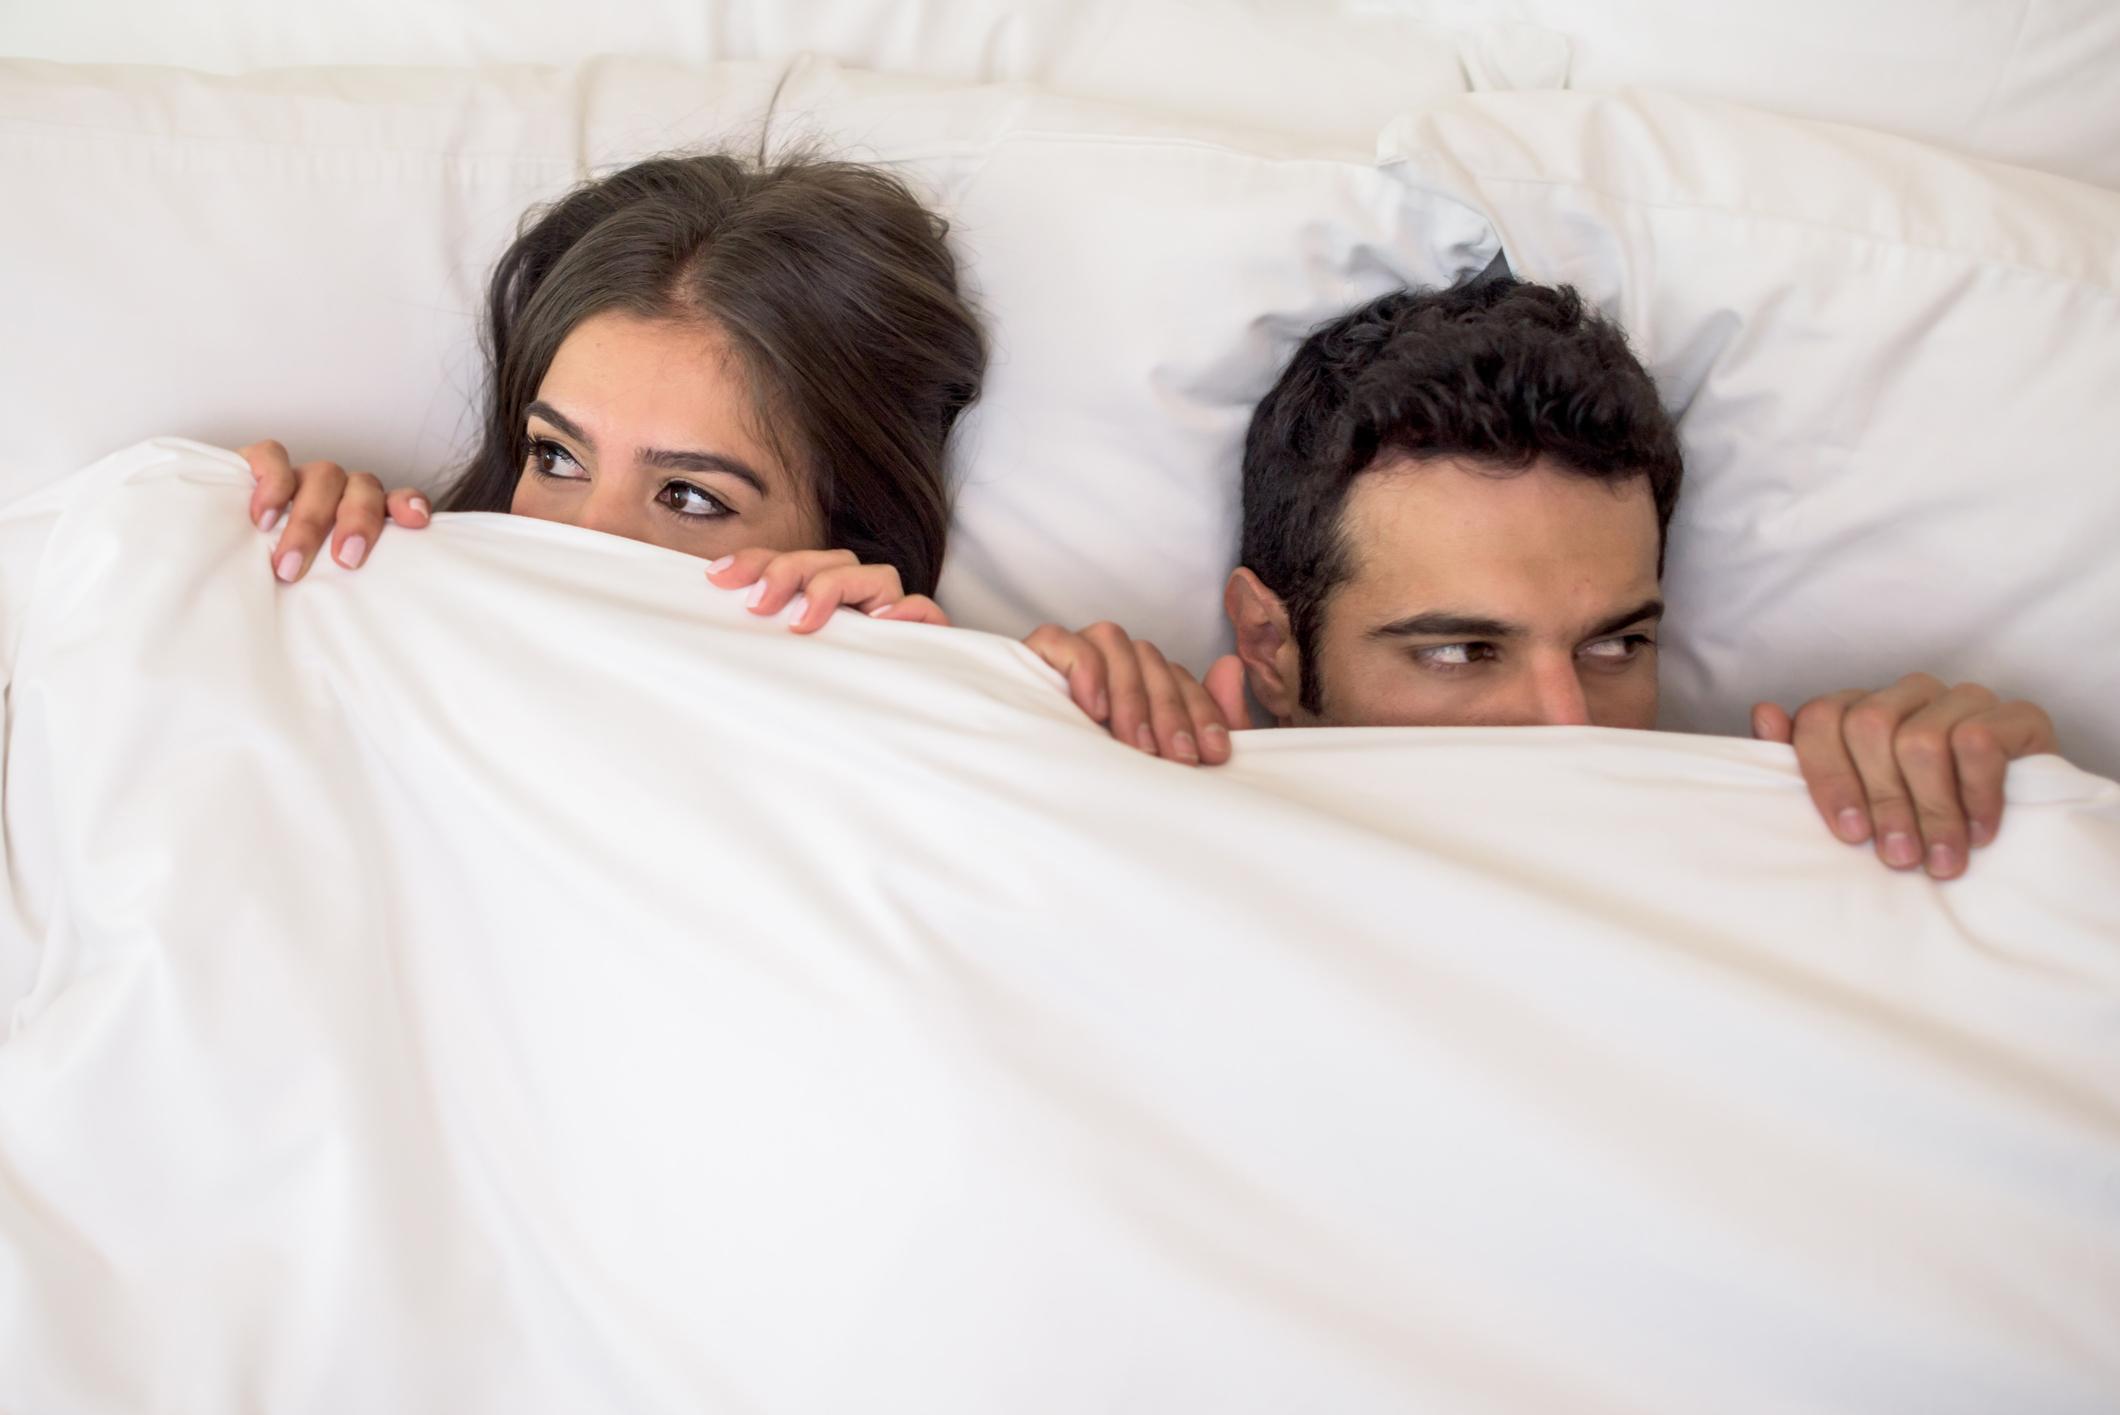 Portrait of a scared couple in bed with man and woman looking very anxious